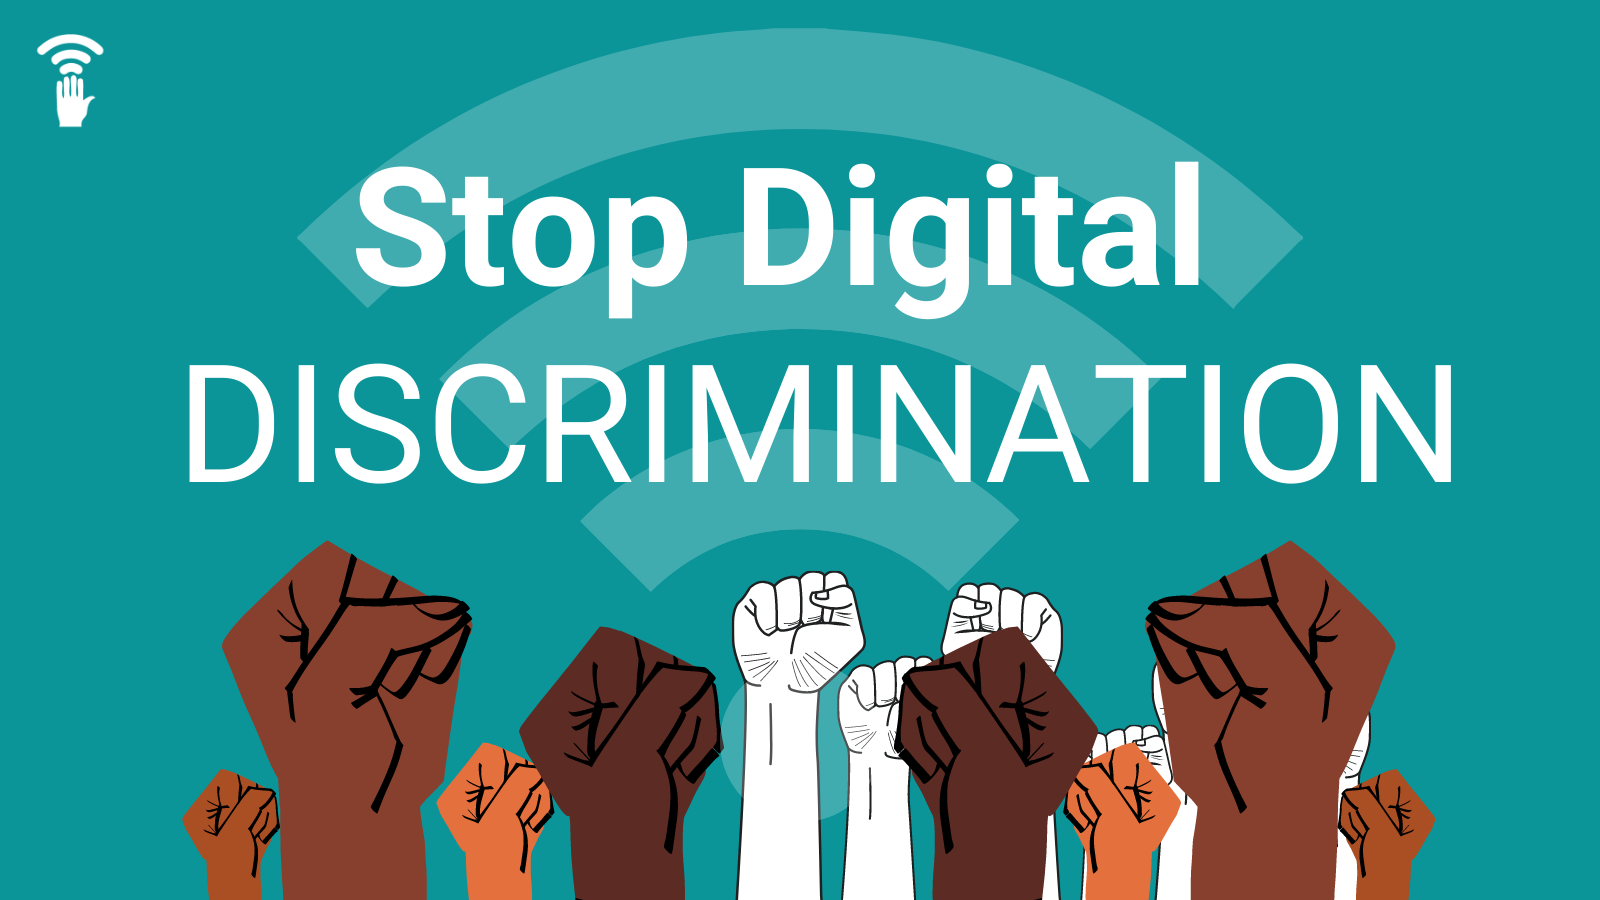 Stop Digital Discrimination with activist fists of many colors